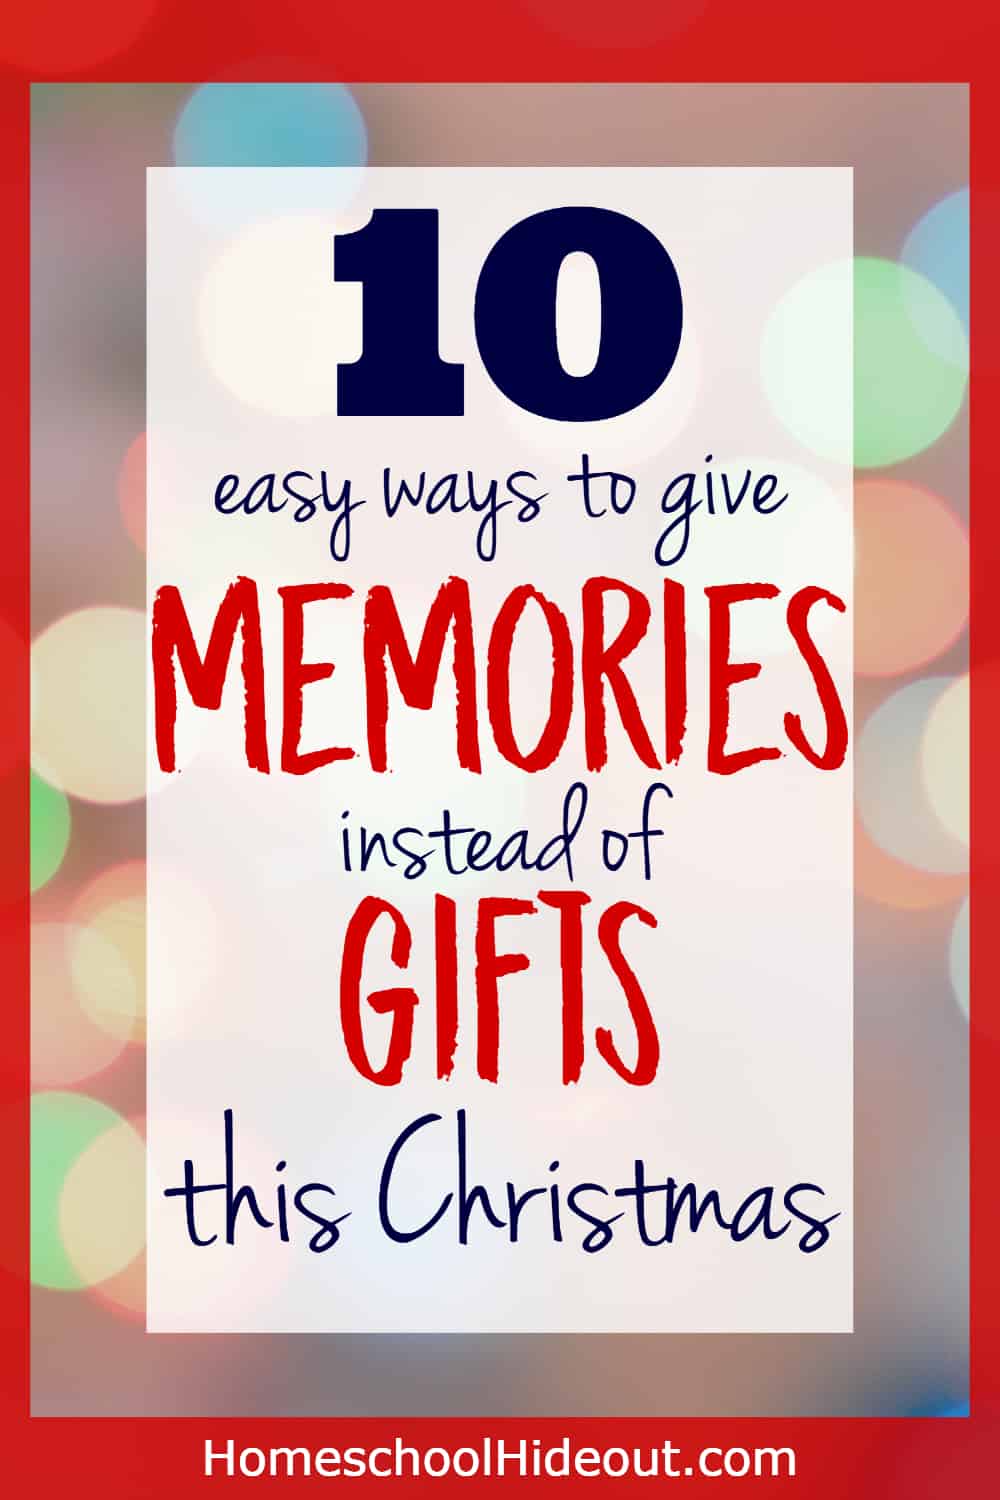 Experience Christmas like never before! Check out these 10 ideas to help you give memories instead of gifts. It'll be the best Christmas of your life!